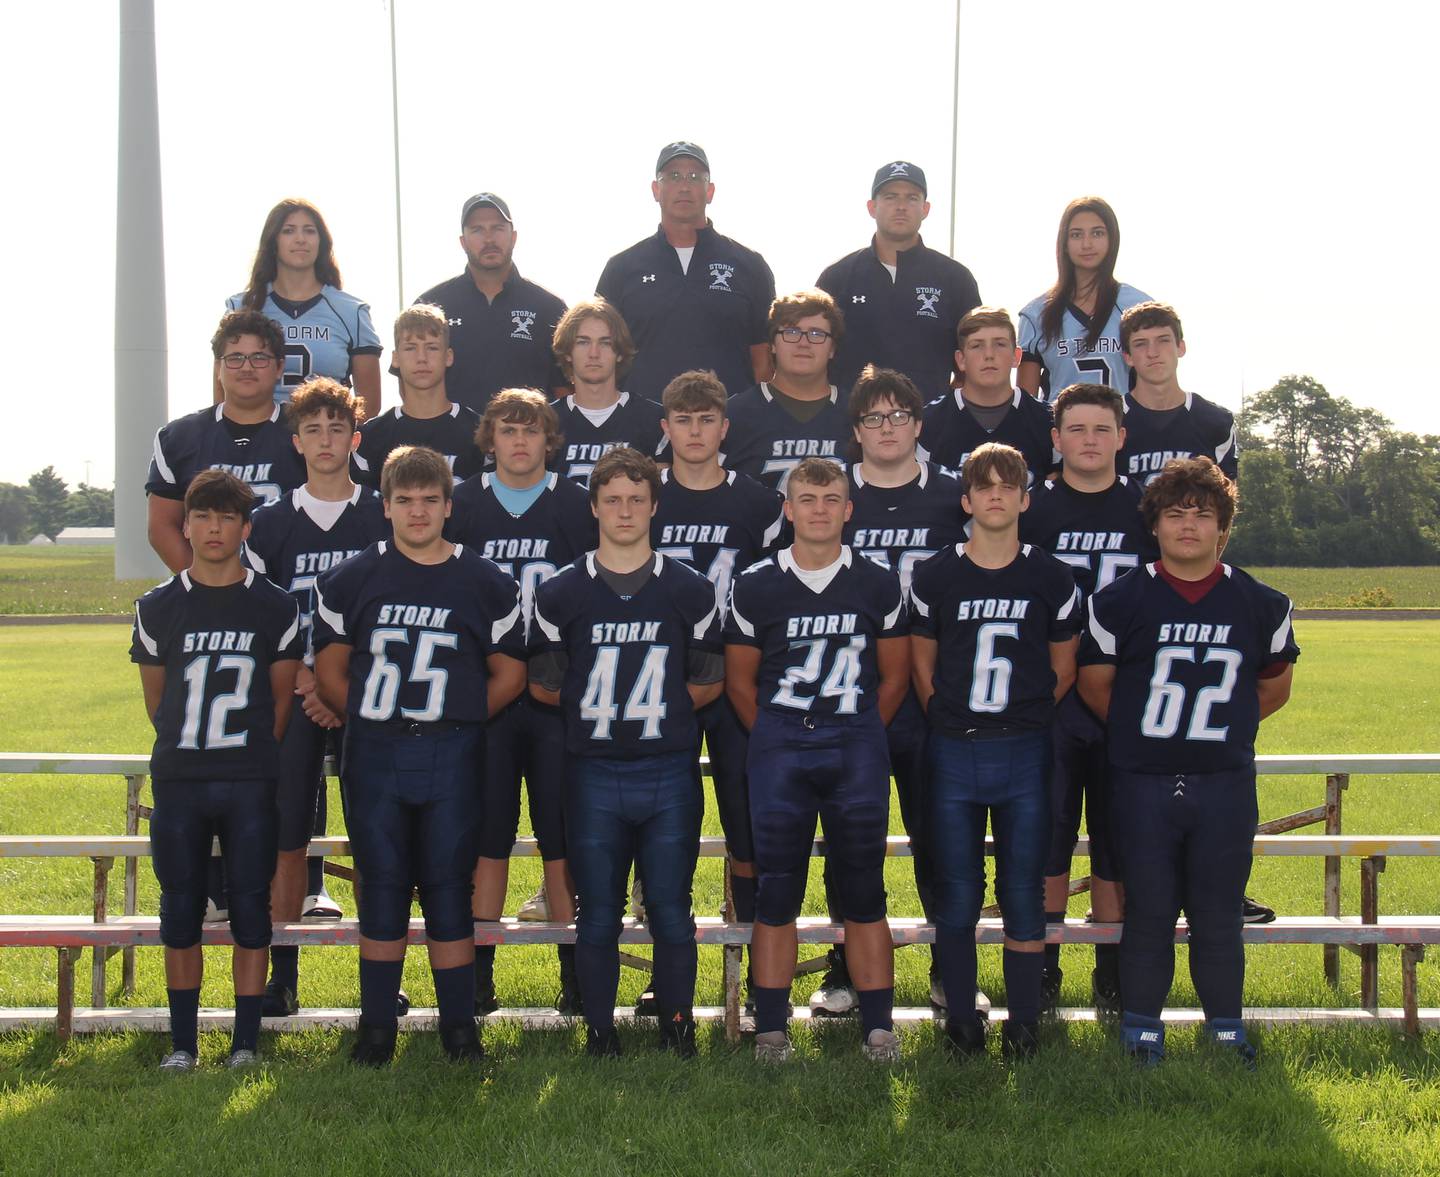 Team members for the Storm F/S football team are: (front row, from left to right) Kai Walowski, Jacob Bolin, Jordan Newman, Tyce Barkman, Ryan Wasilewski and Christopher Novak; (second row) Brady Hartz, Brock Rediger, Aidan Besler, Bryson Foster and Bracin Patnoe; (third row) Ayden Andrade, Brady Carrington, Drake Hardy, Gus Anderson, Bradley Schoff and James Etheridge; and (back row: manager Taylor Rowland, Coach Warkins, Coach Wasilewski, Coach Mormon and manager Makenna Maupin. Not Pictured: Zach Wiggim, Serenity Stone, Braydin Zimmer and managers Ryley Egan and Toby Behrends.